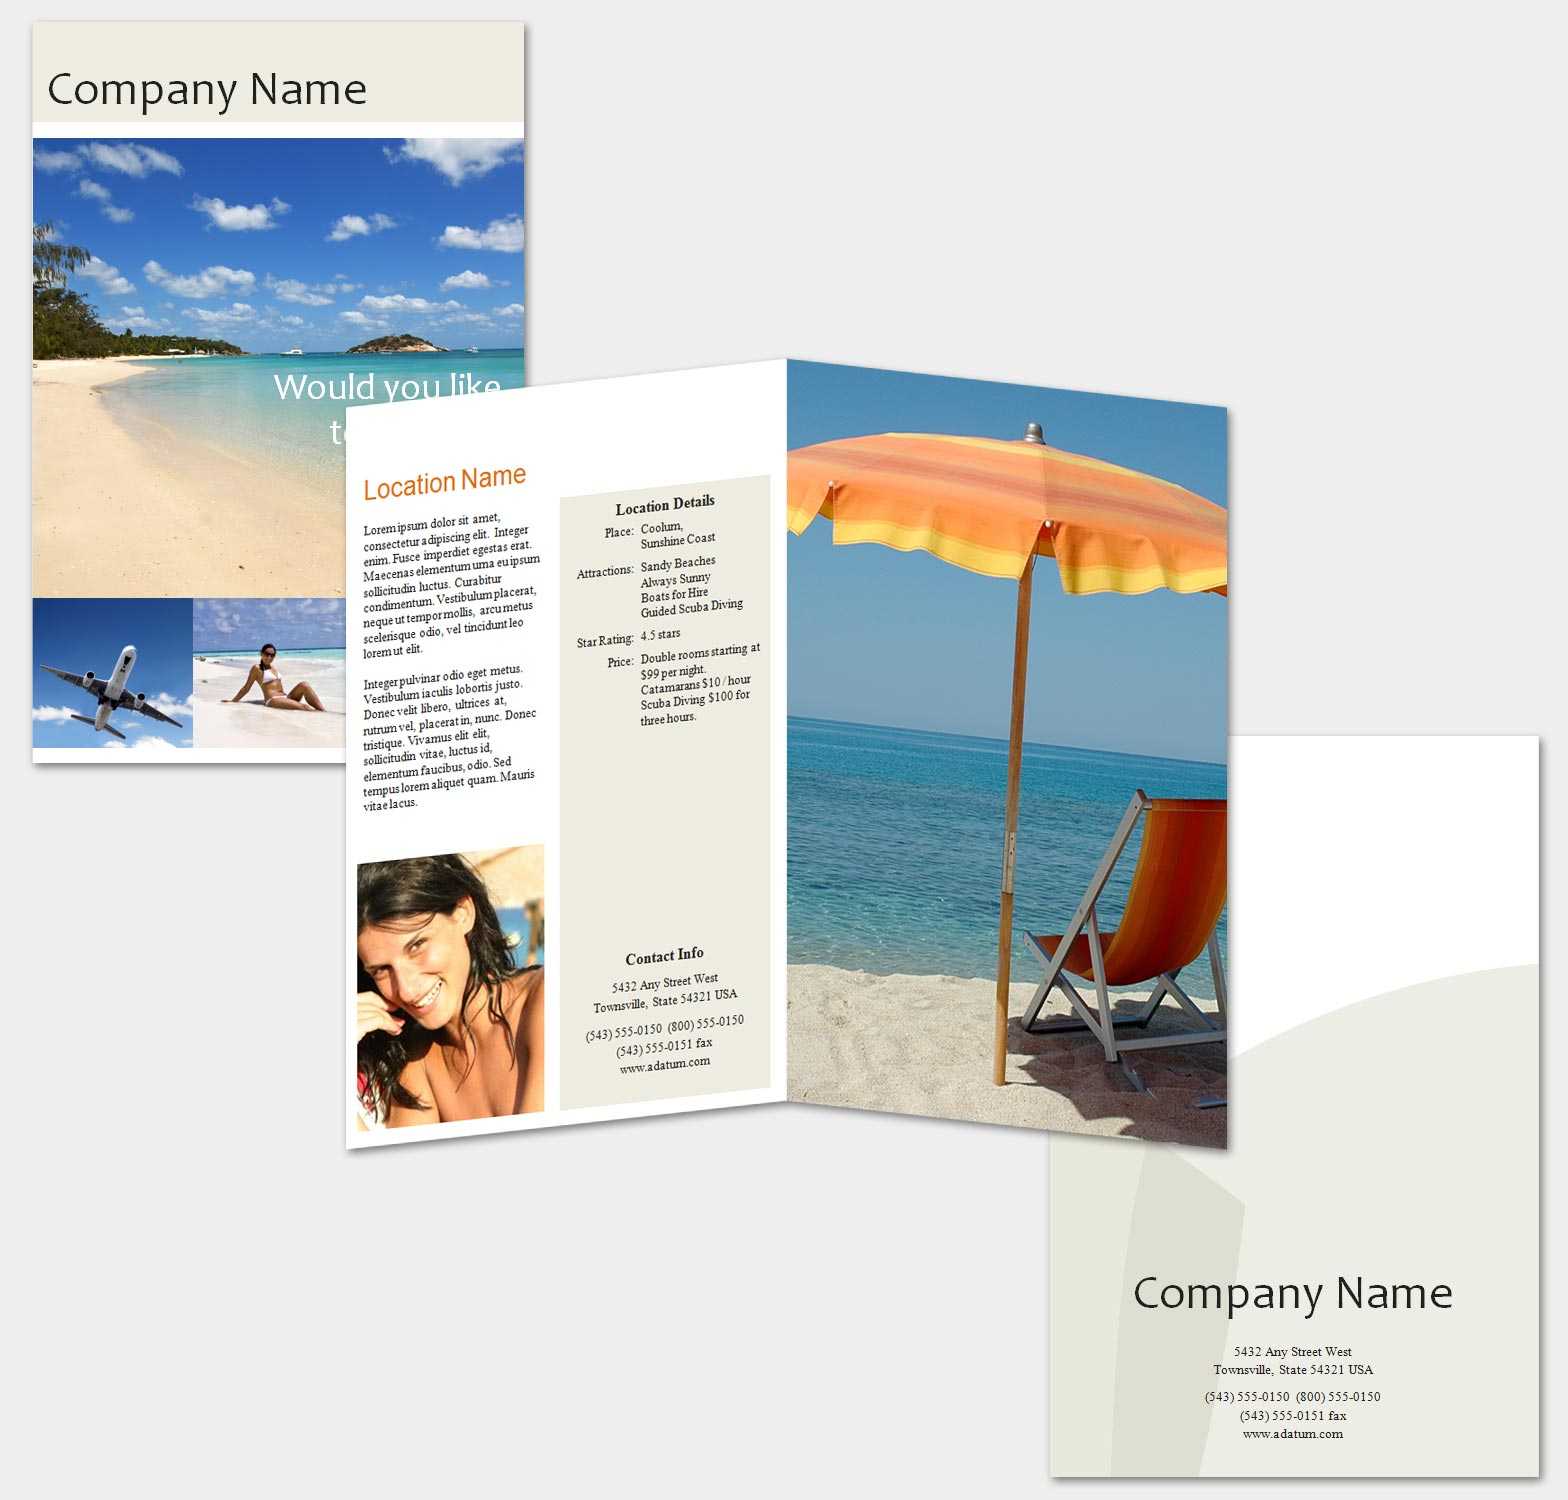 Cruise Travel Brochure Template Word Amp Publisher Brochure For Word Travel Brochure Template